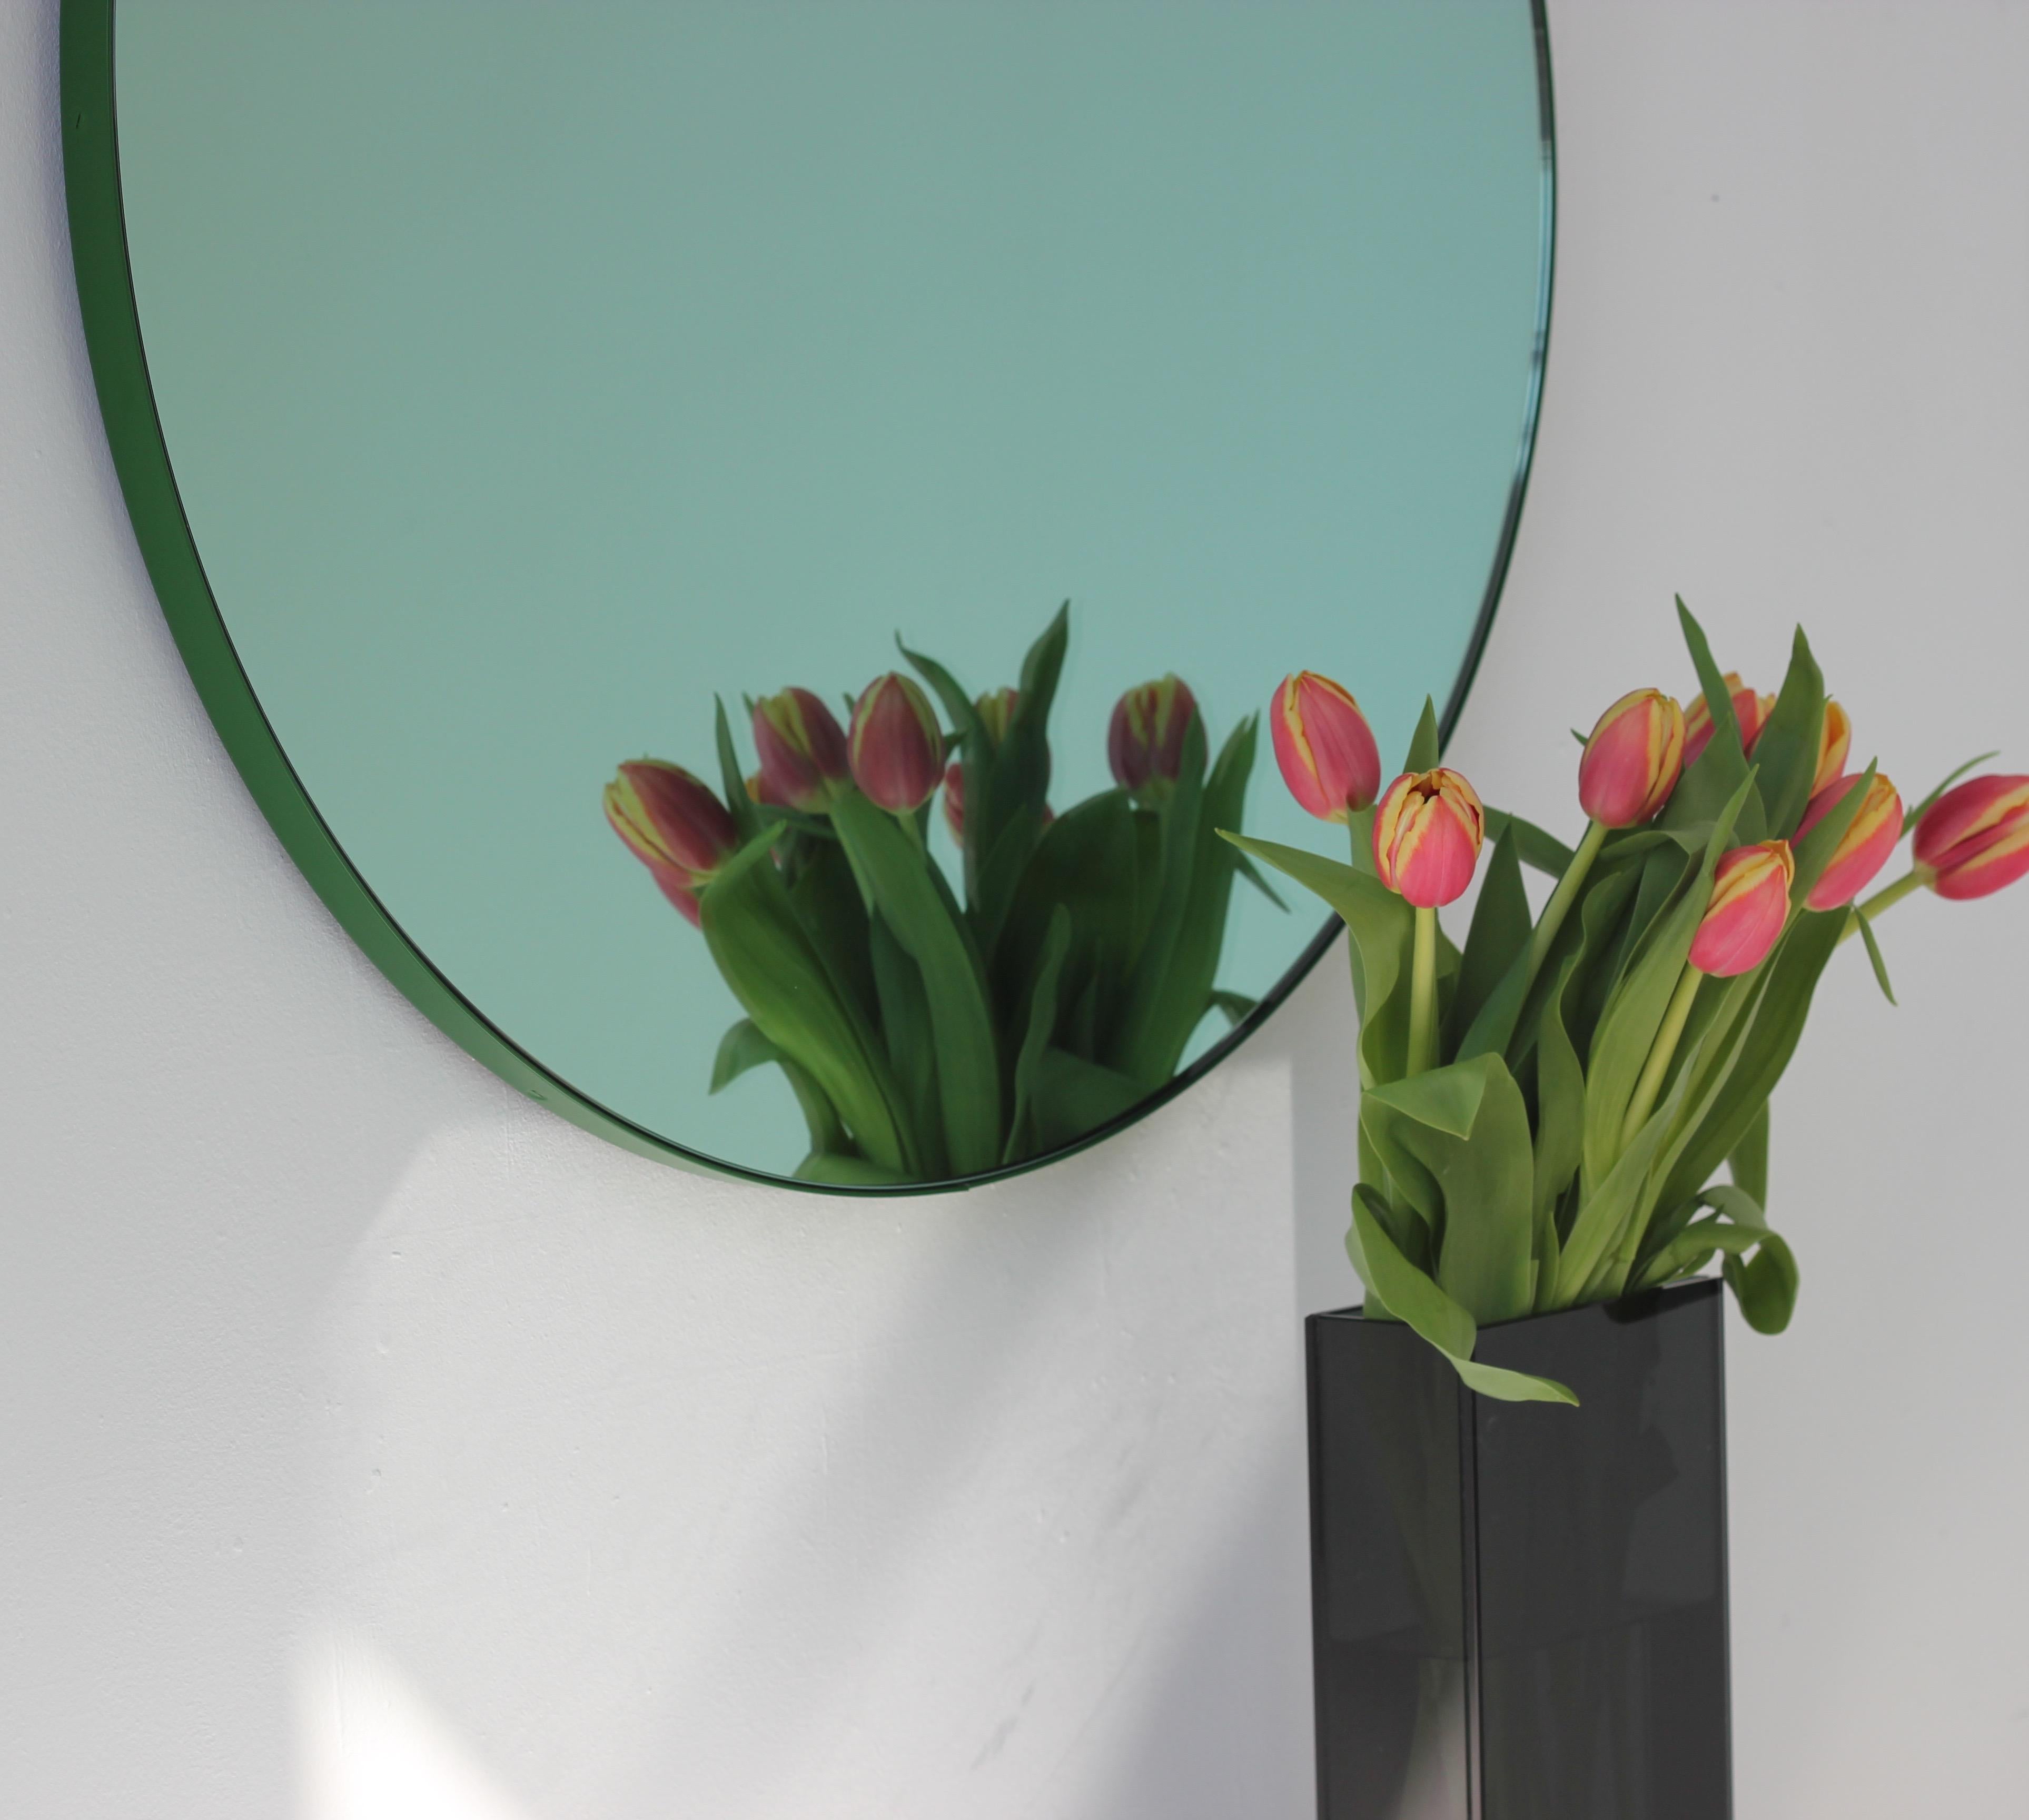 Powder-Coated Orbis™ Green Tinted Modern Round Mirror with Green Frame - Large